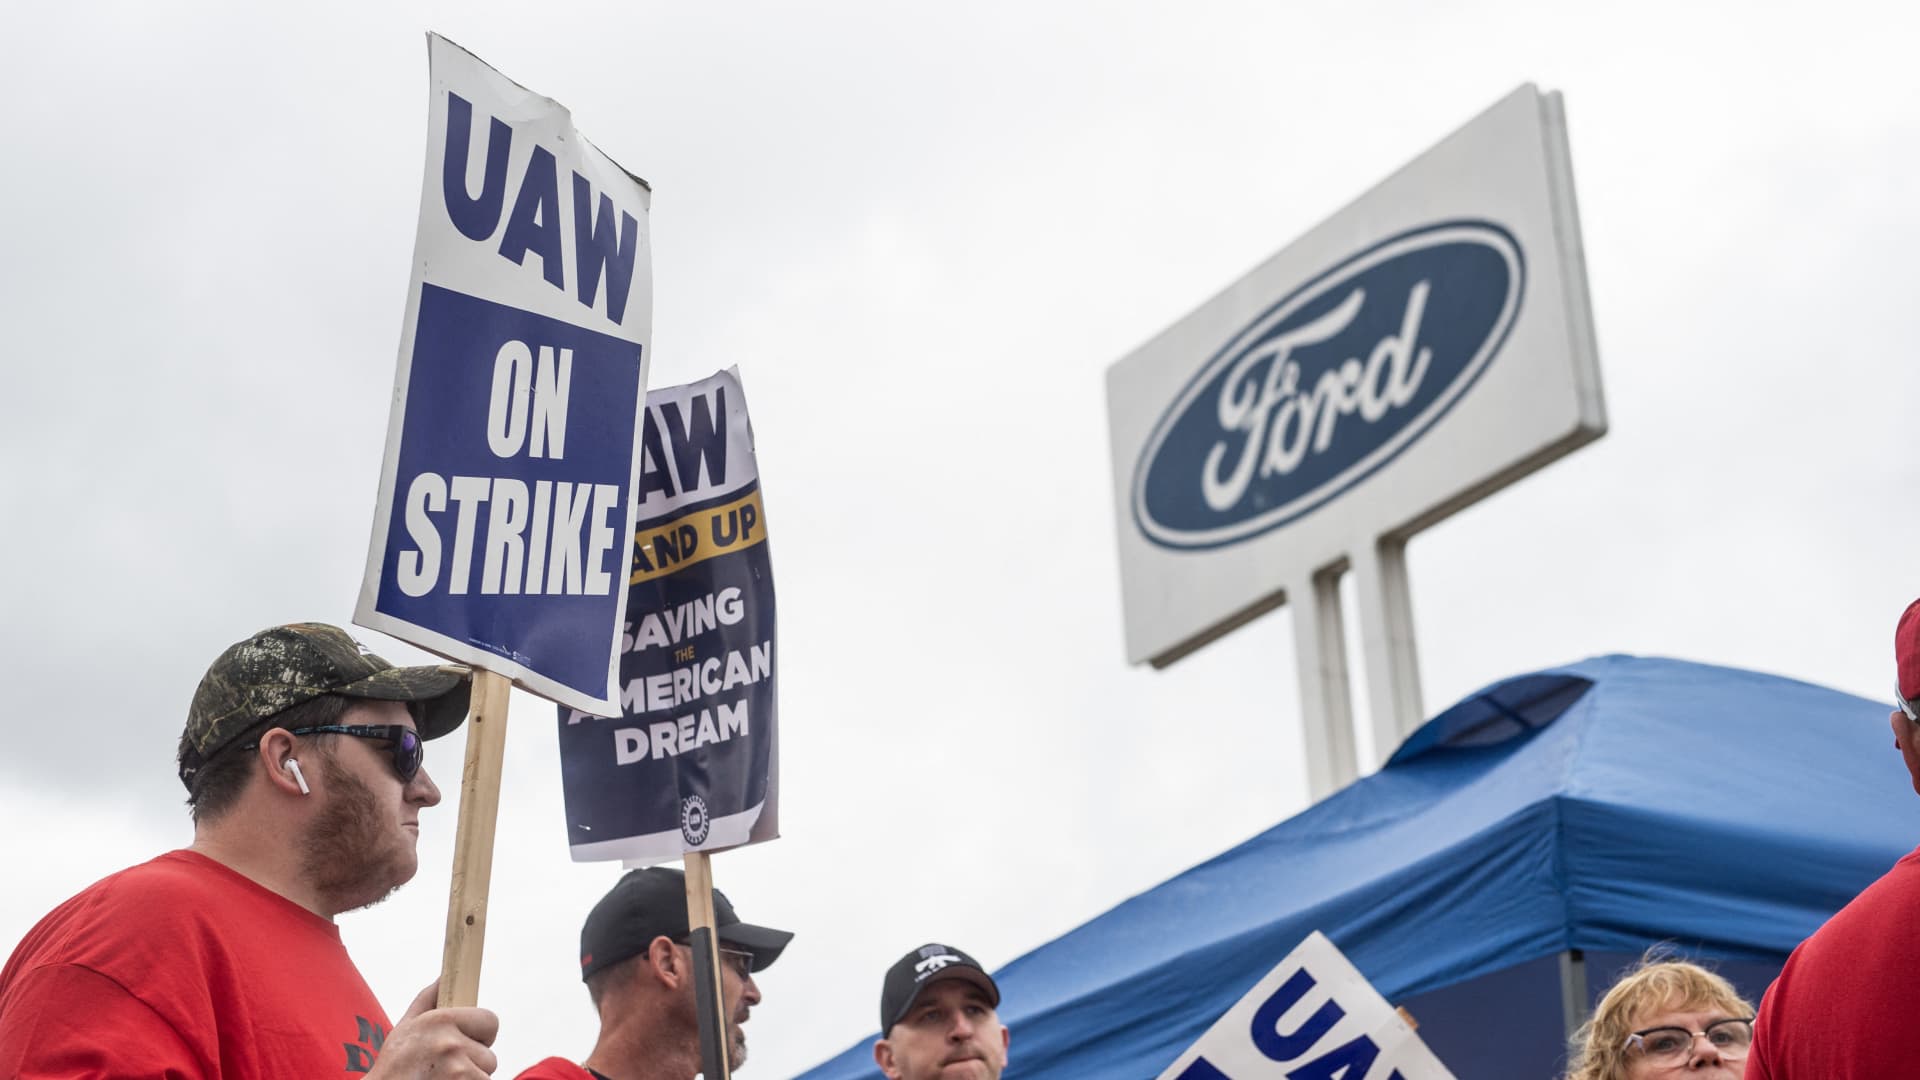 Ford union staff ratify UAW deal, closing out historic negotiations with Detroit automakers